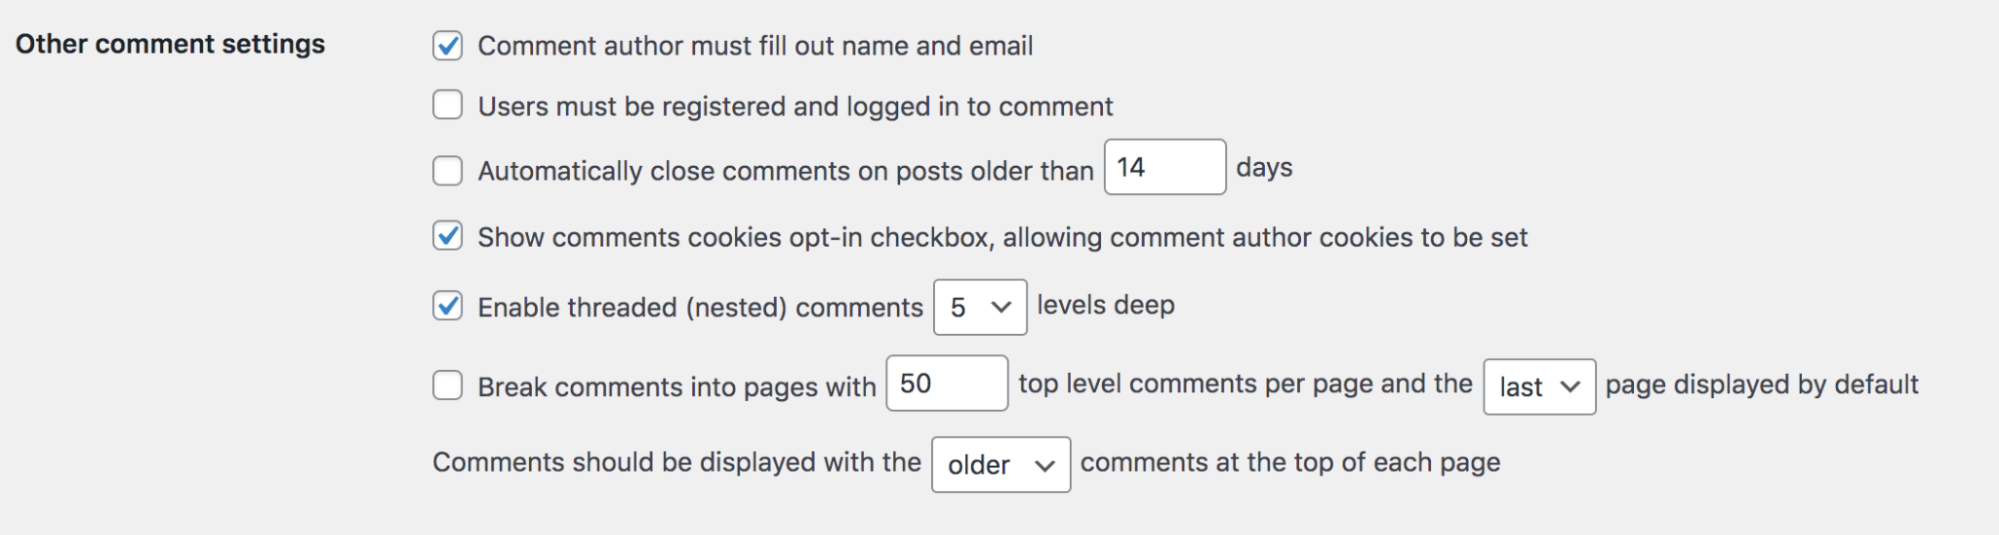 other comment settings, like nesting options